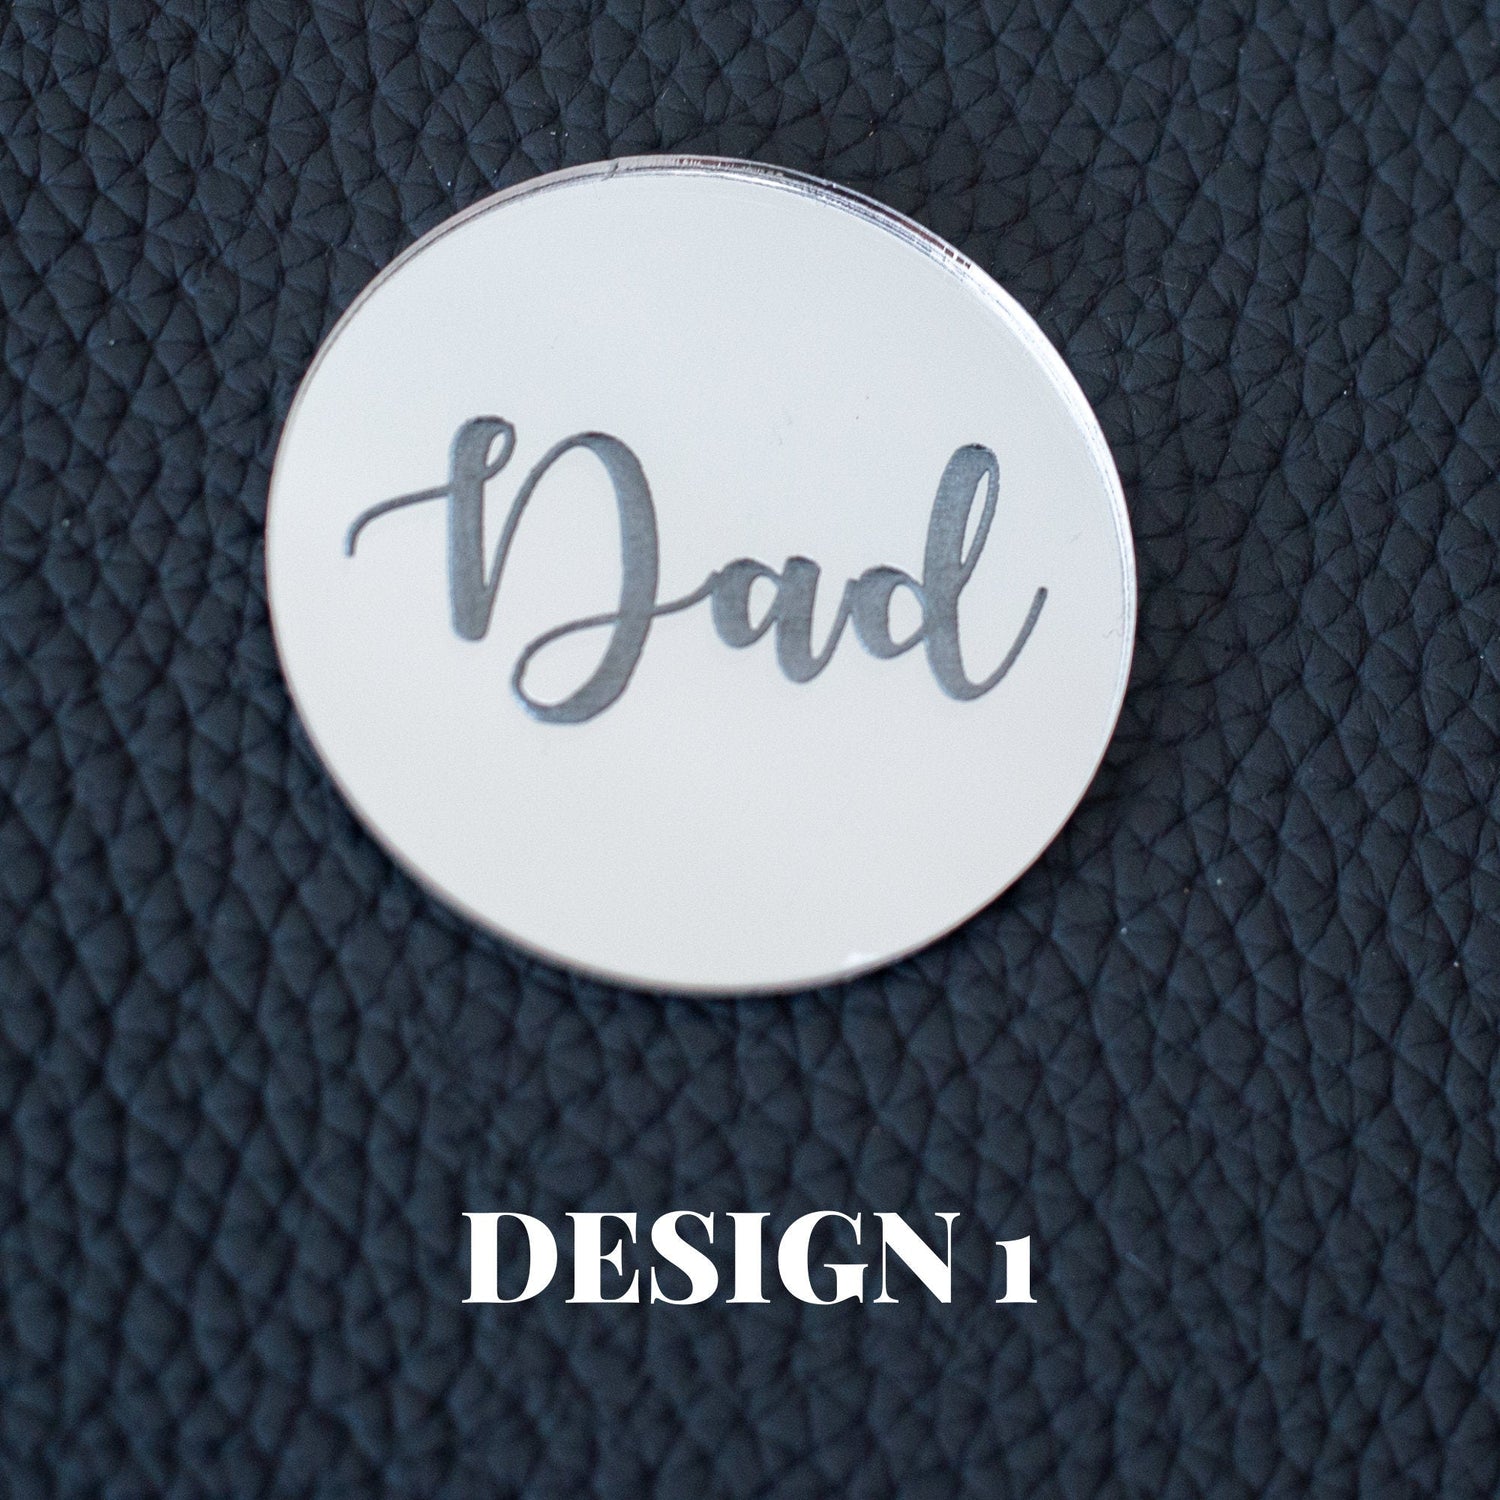 Fathers Day Engraved Disc/Tags - Cake Topper Warehouse